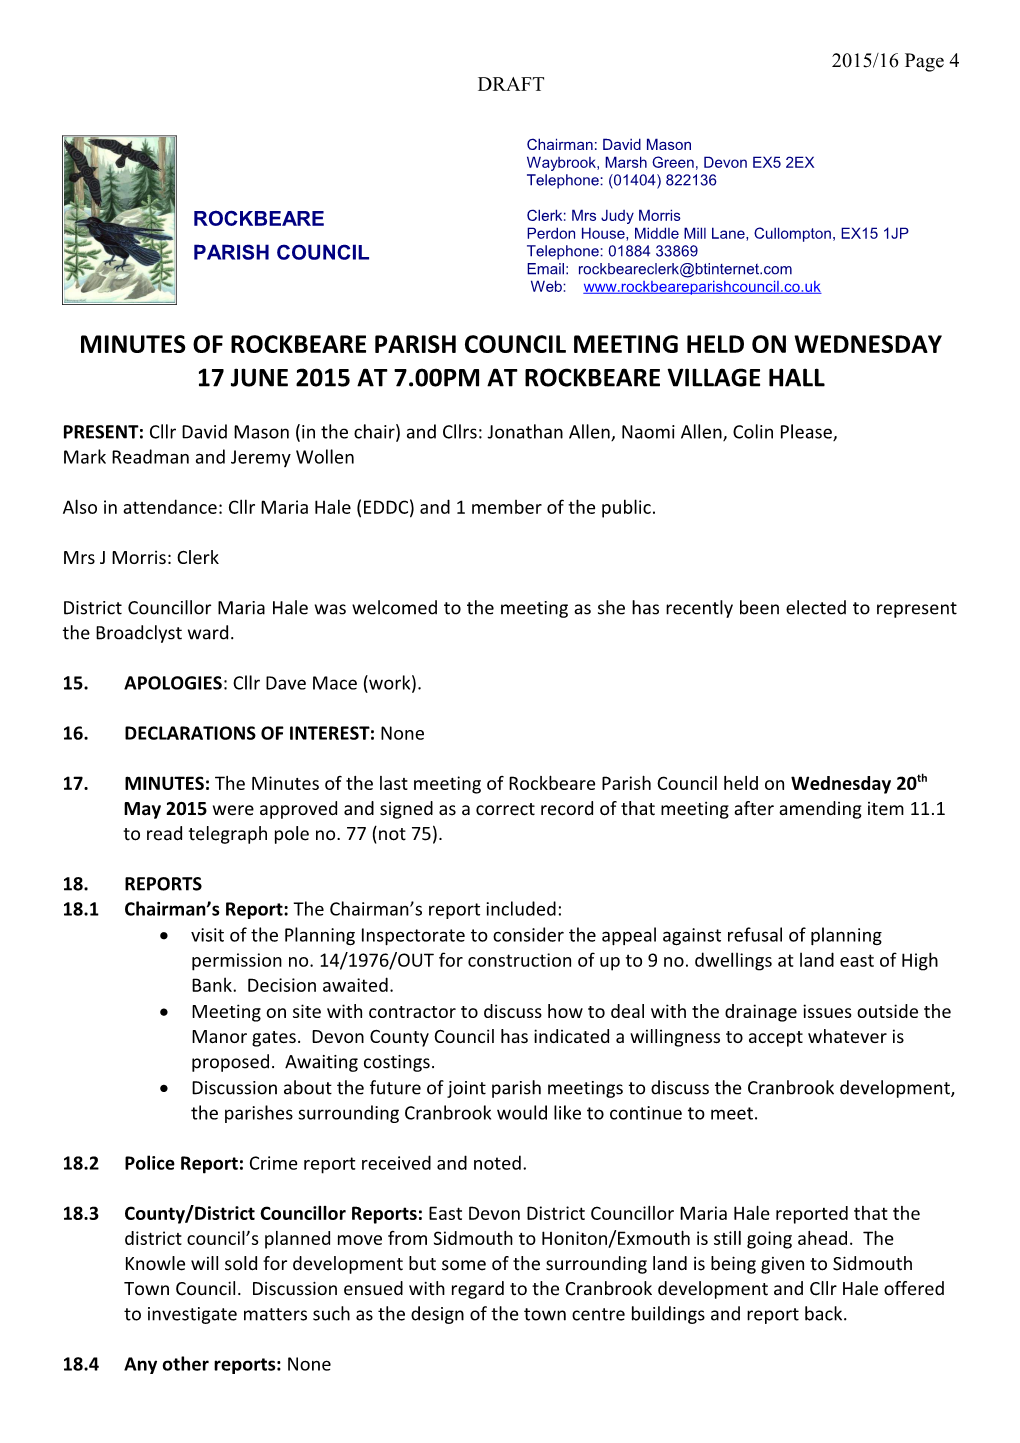 MINUTES of ROCKBEARE PARISH COUNCIL MEETING HELD on WEDNESDAY 17 June 2015 at 7.00PM AT